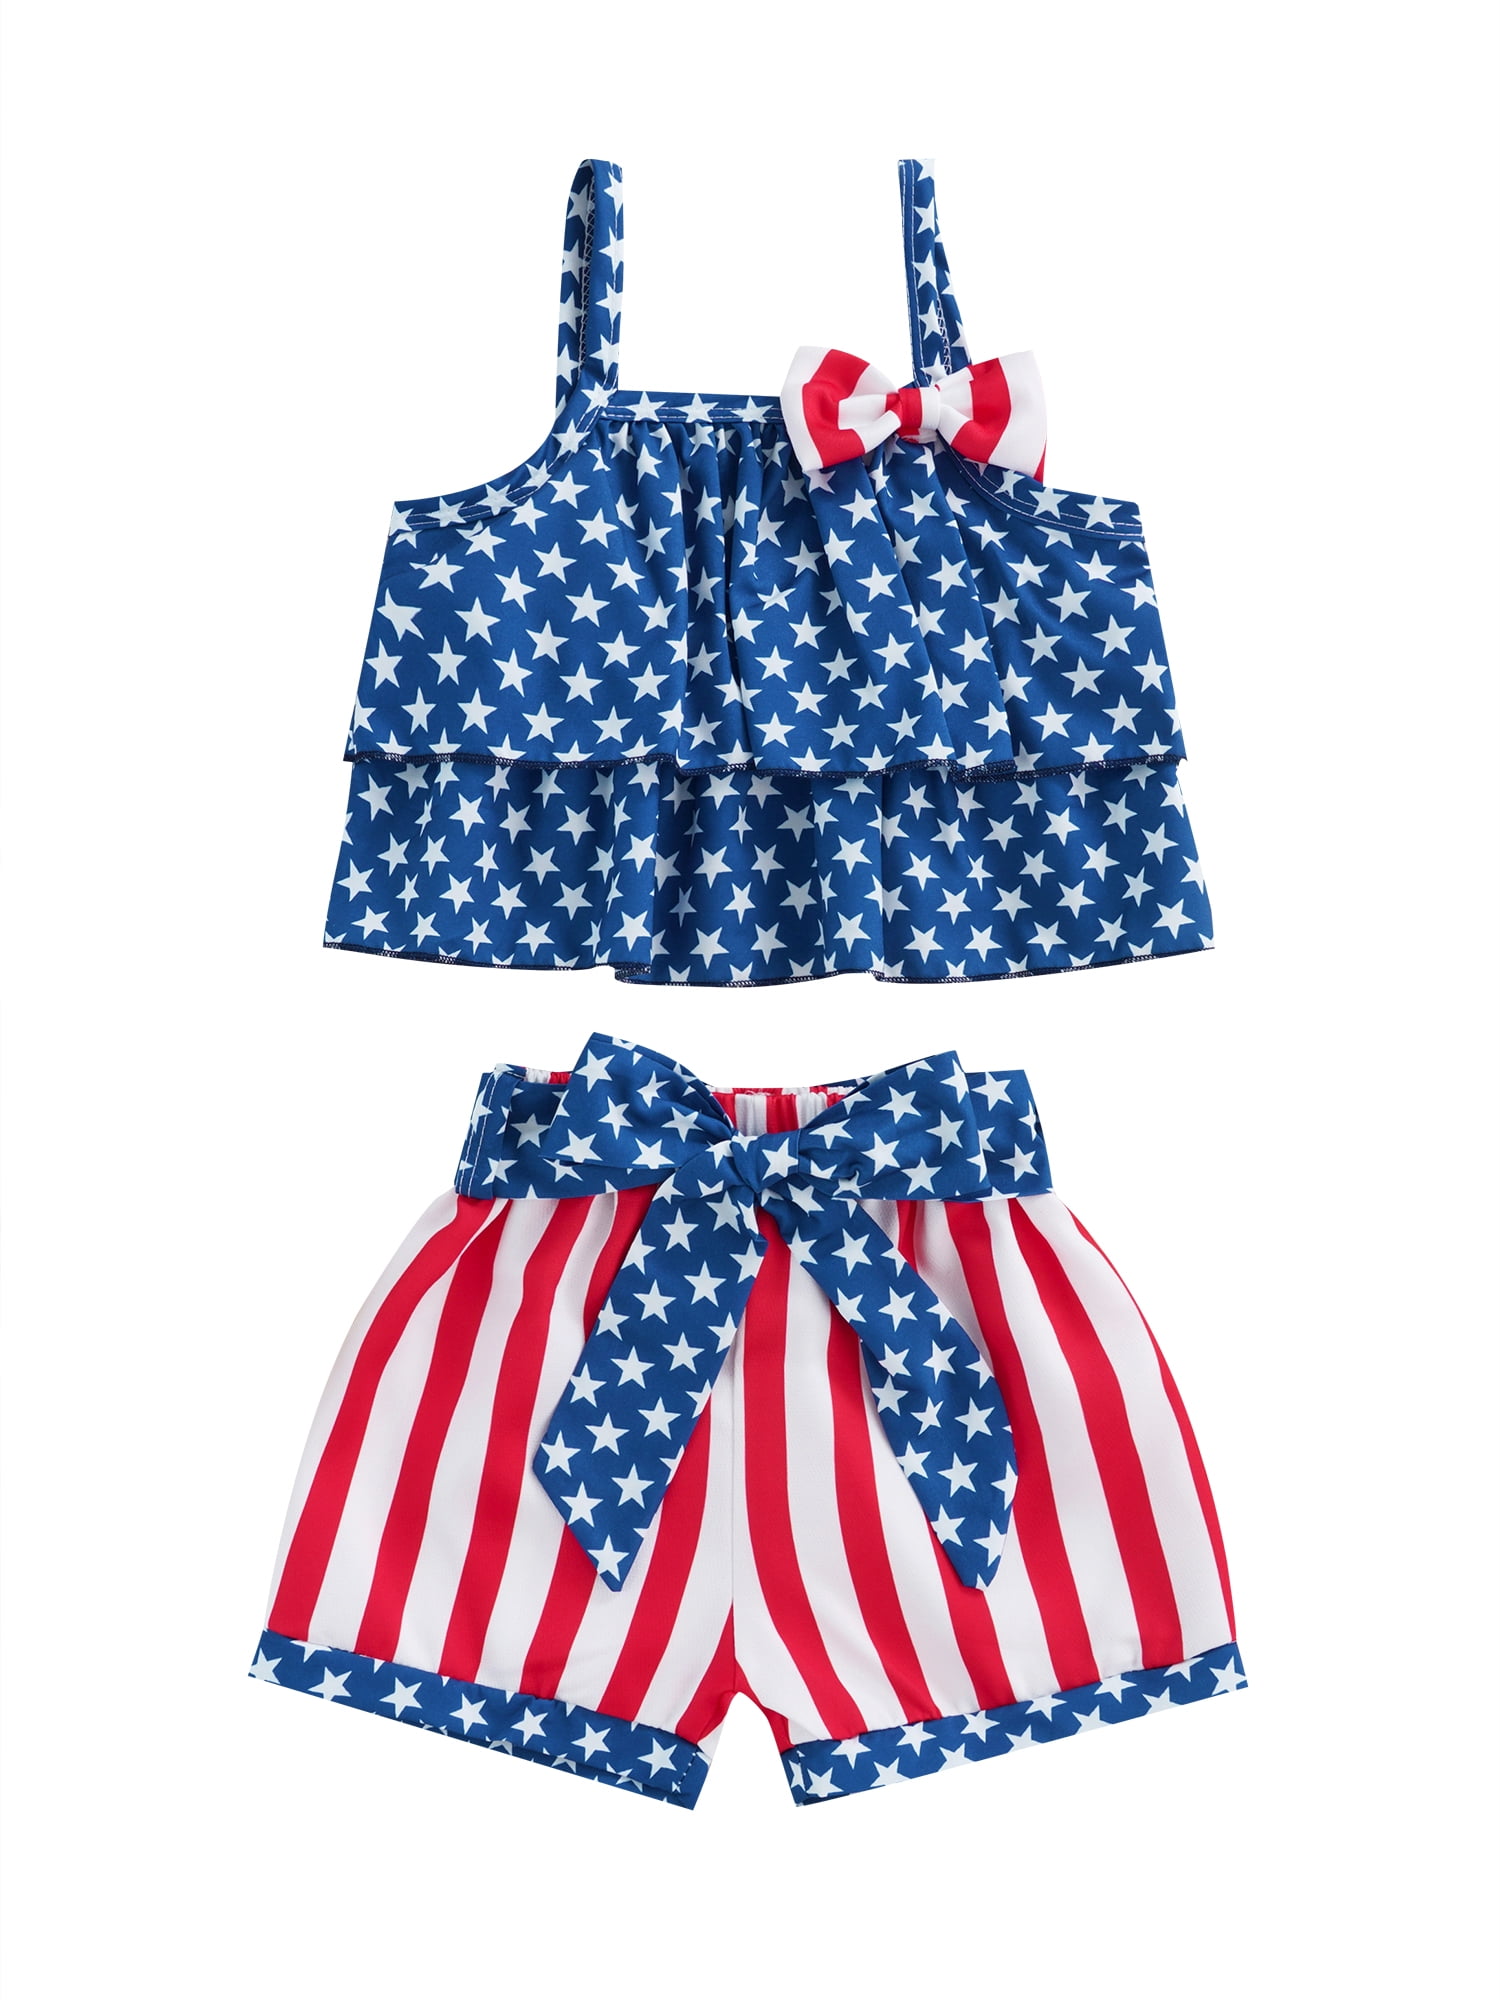 JVNSS July 4Th Independence Day Retro American Flag Comfort Little Baby Girls Flounced T Shirts Outfits for 2-6T Baby Girls